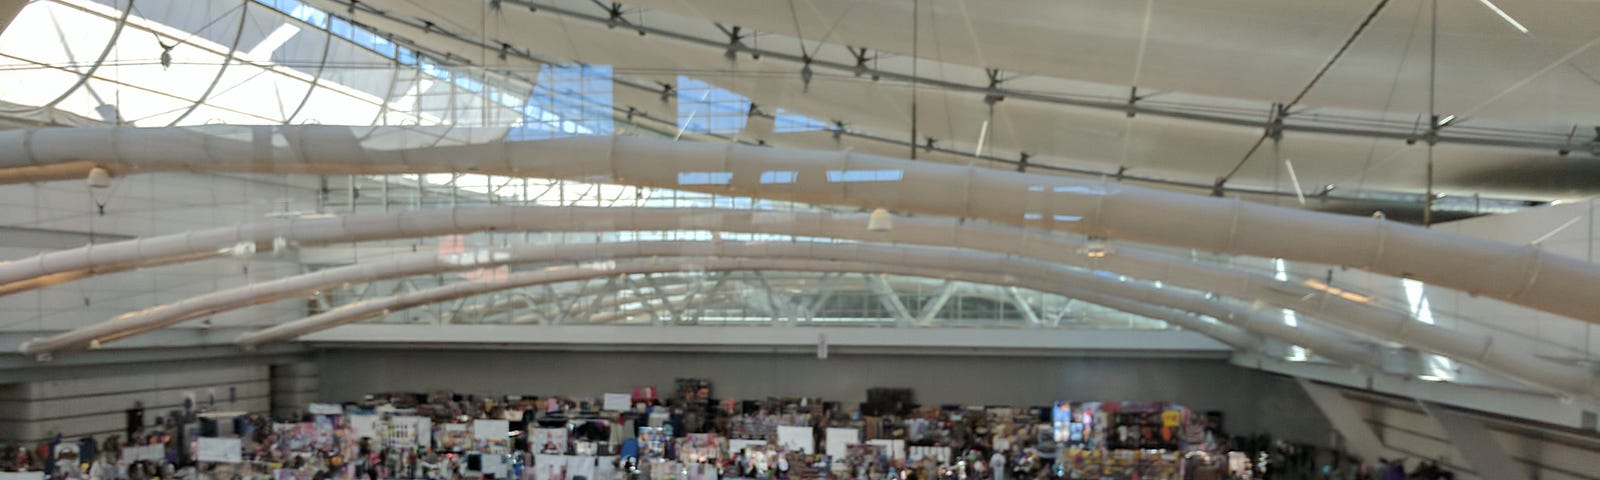 Looking out over a crowded exhibitor hall